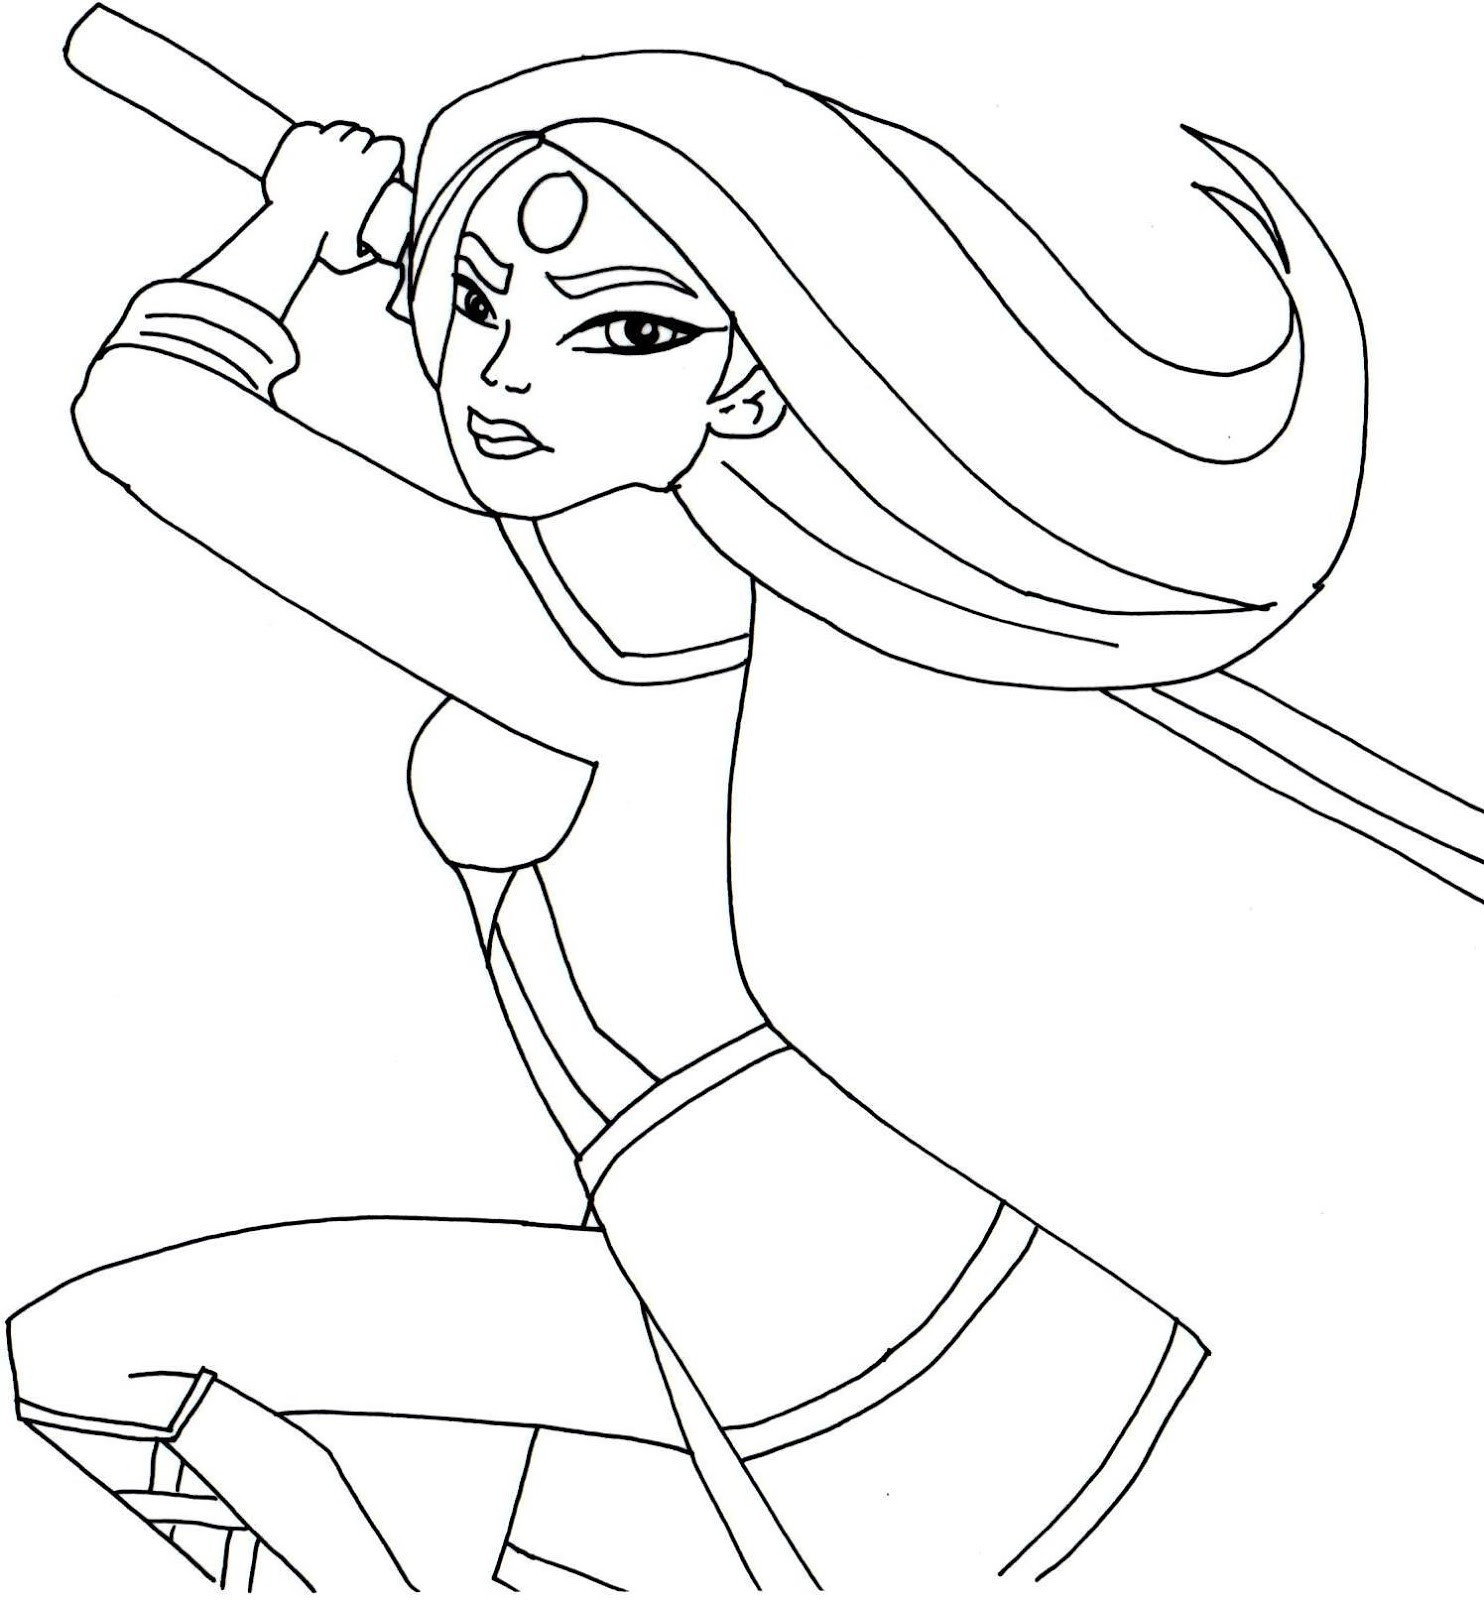 Dc Super Hero Girls Coloring Pages
 Dc Superhero Girls Coloring Sheets thekindproject